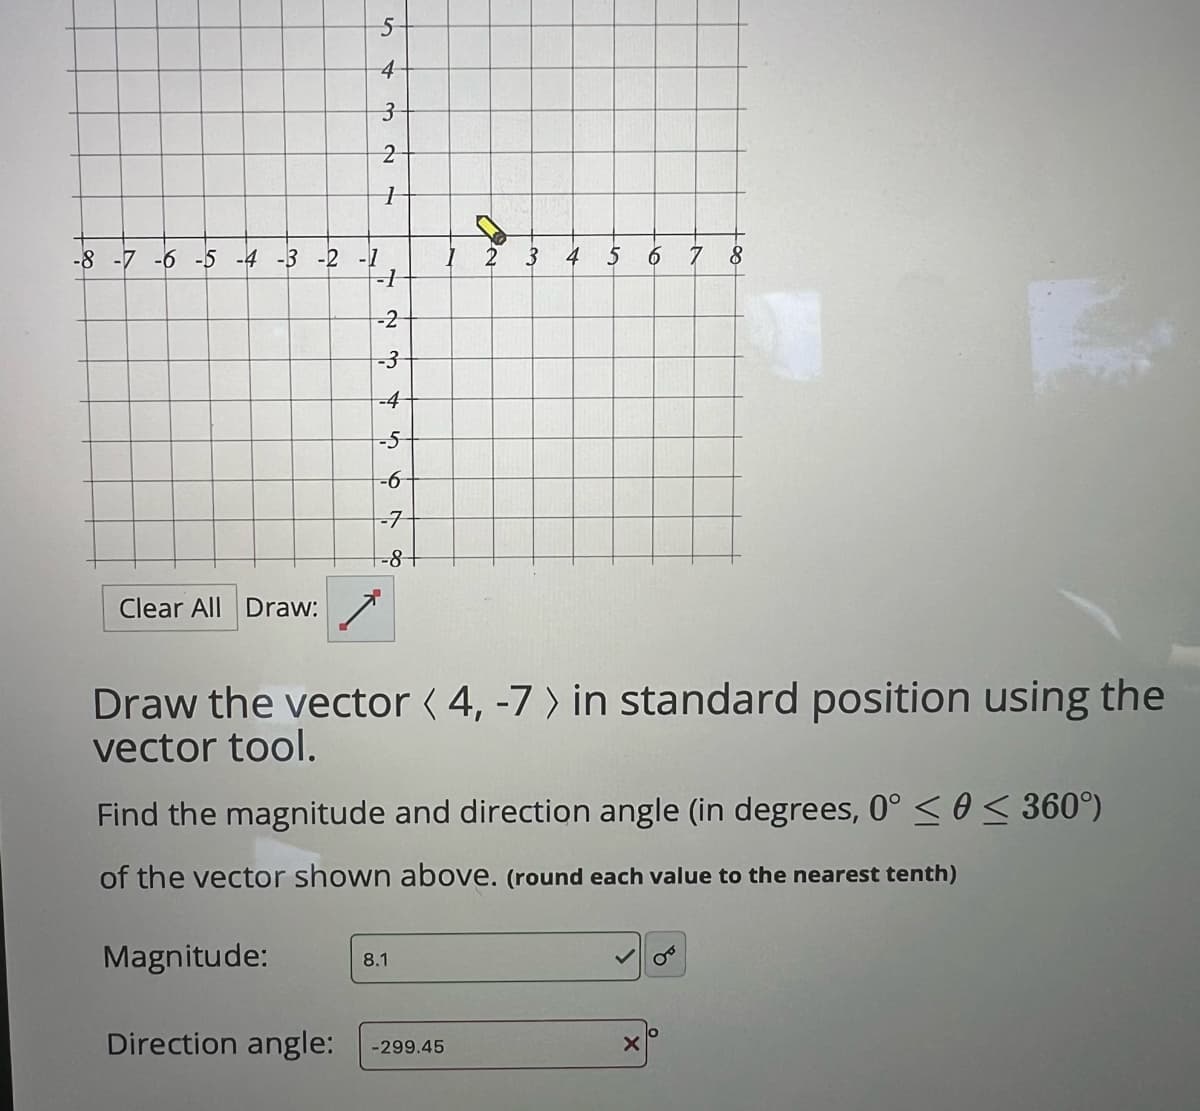 5
4
3
2
1
-8 -7 -6 -5 -4 -3 -2 -1
2
3 4
5
6 7 8
-1
-2
-3
-4
-5
-6
-7
-8
Clear All Draw:
Draw the vector ( 4, -7> in standard position using the
vector tool.
Find the magnitude and direction angle (in degrees, 0° << 360°)
of the vector shown above. (round each value to the nearest tenth)
Magnitude:
8.1
Direction angle: -299.45
×